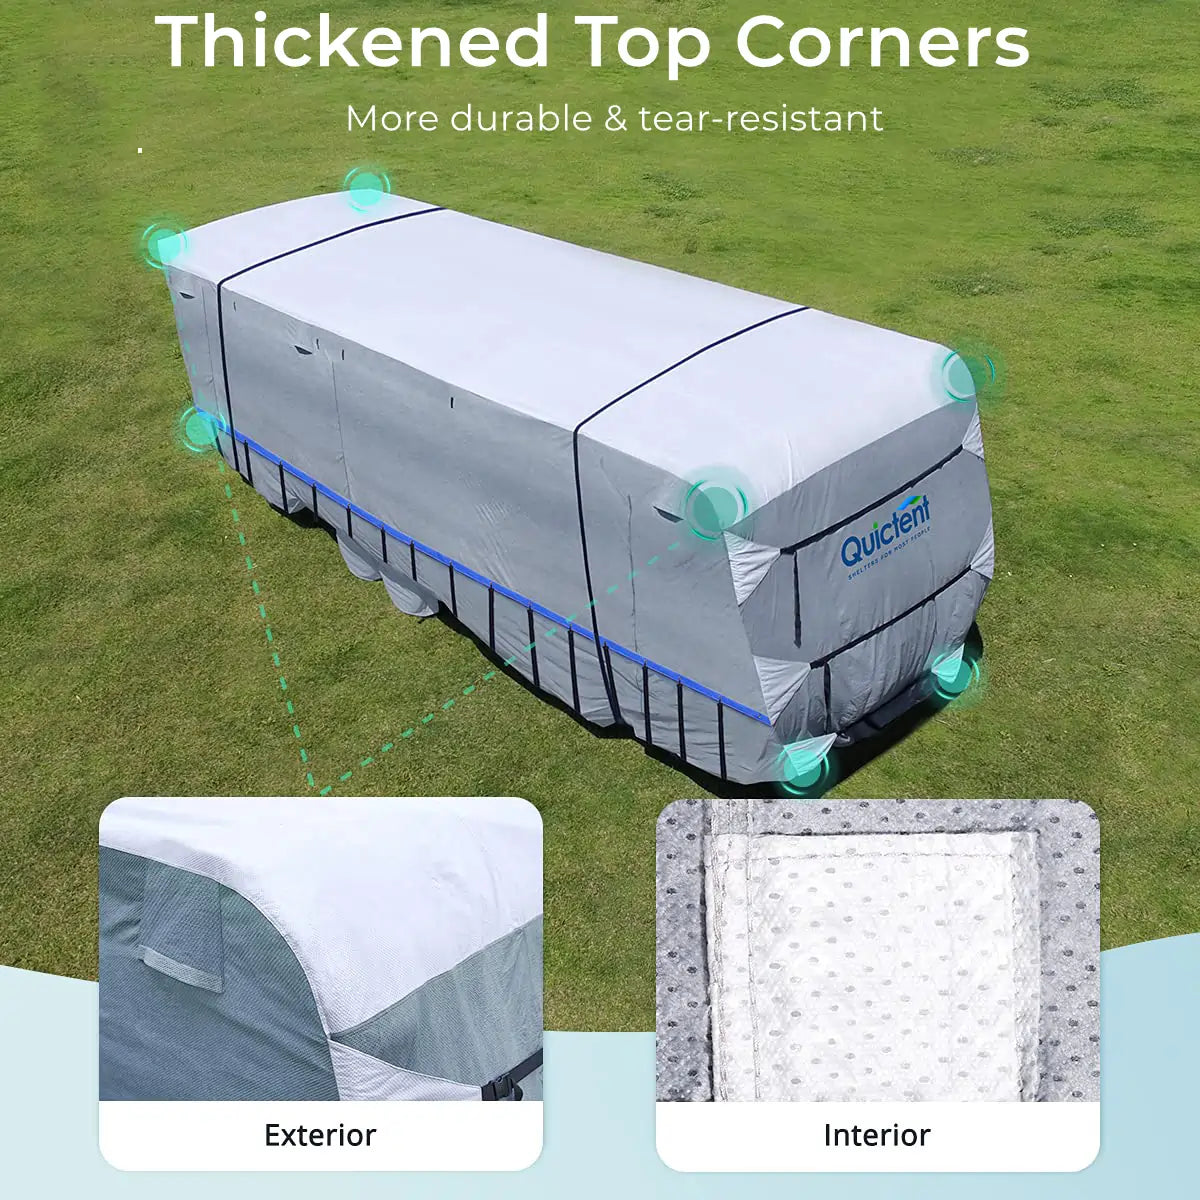 Extra-Thick Top coeners Travel Trailer Covers